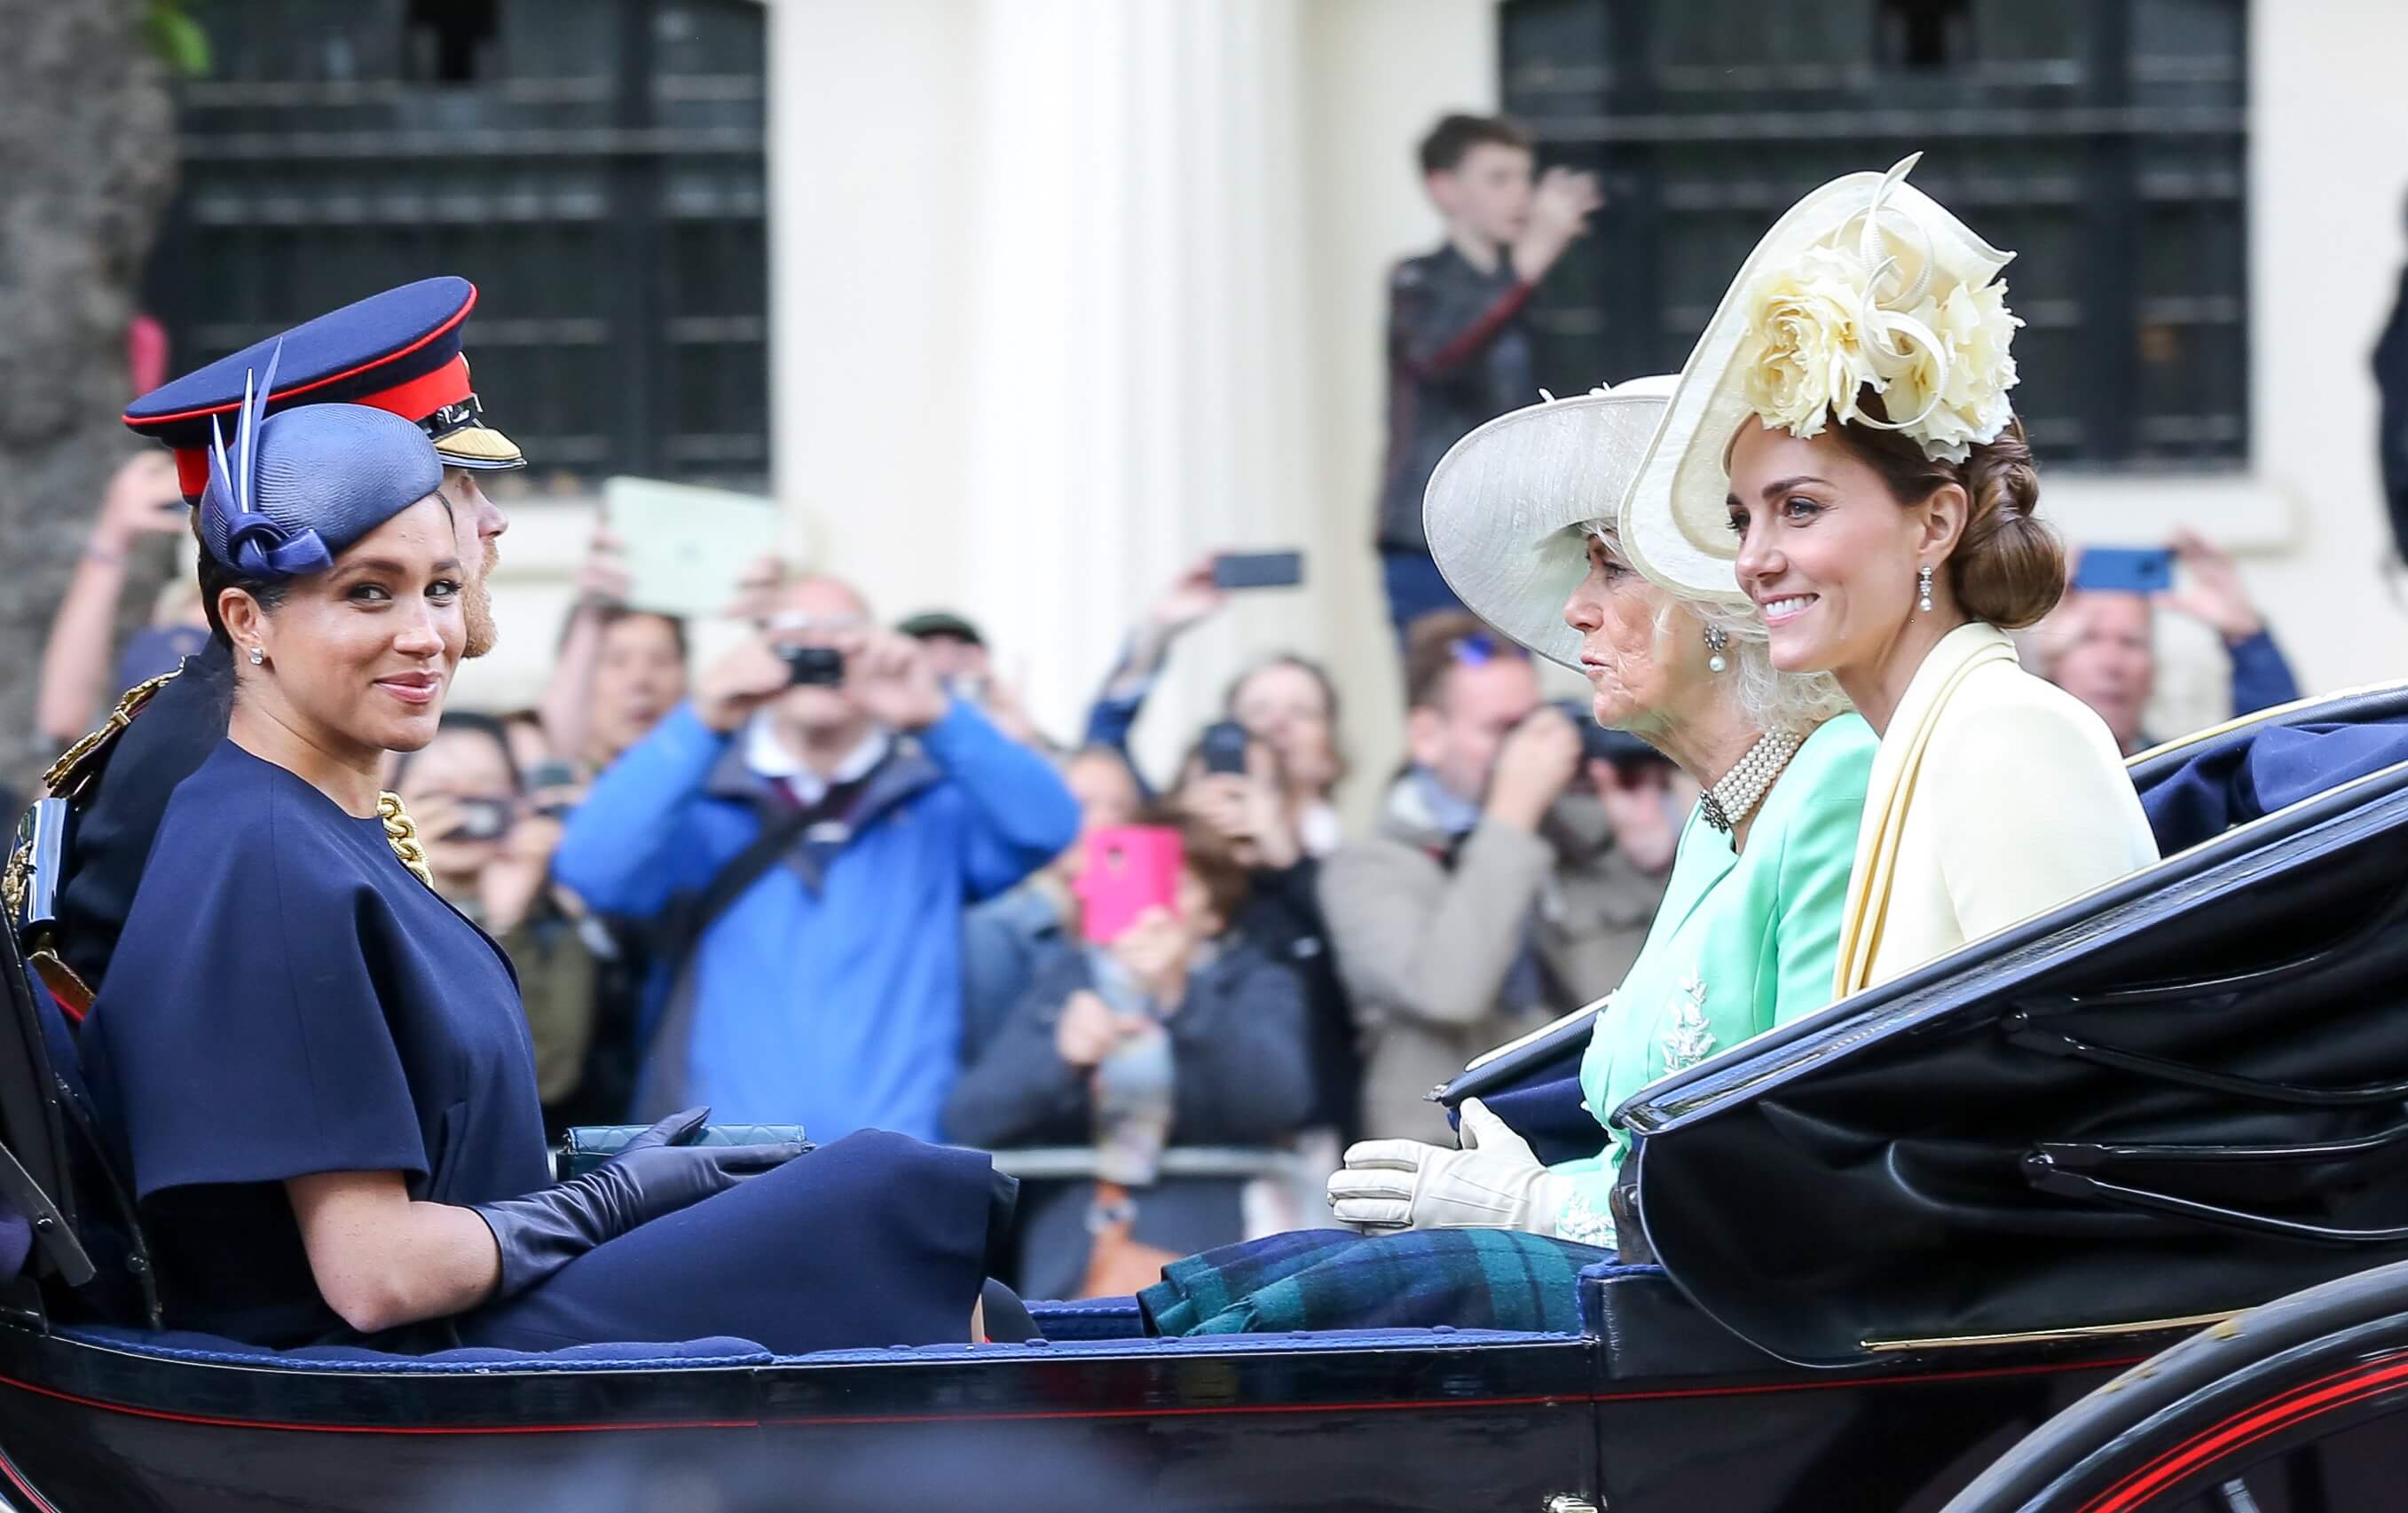 Meghan Markle and Kate Middleton, who handled the press differently, are seen in a carriage with Prince Harry and Camilla Parker Bowles after Trooping the Colour in 2019